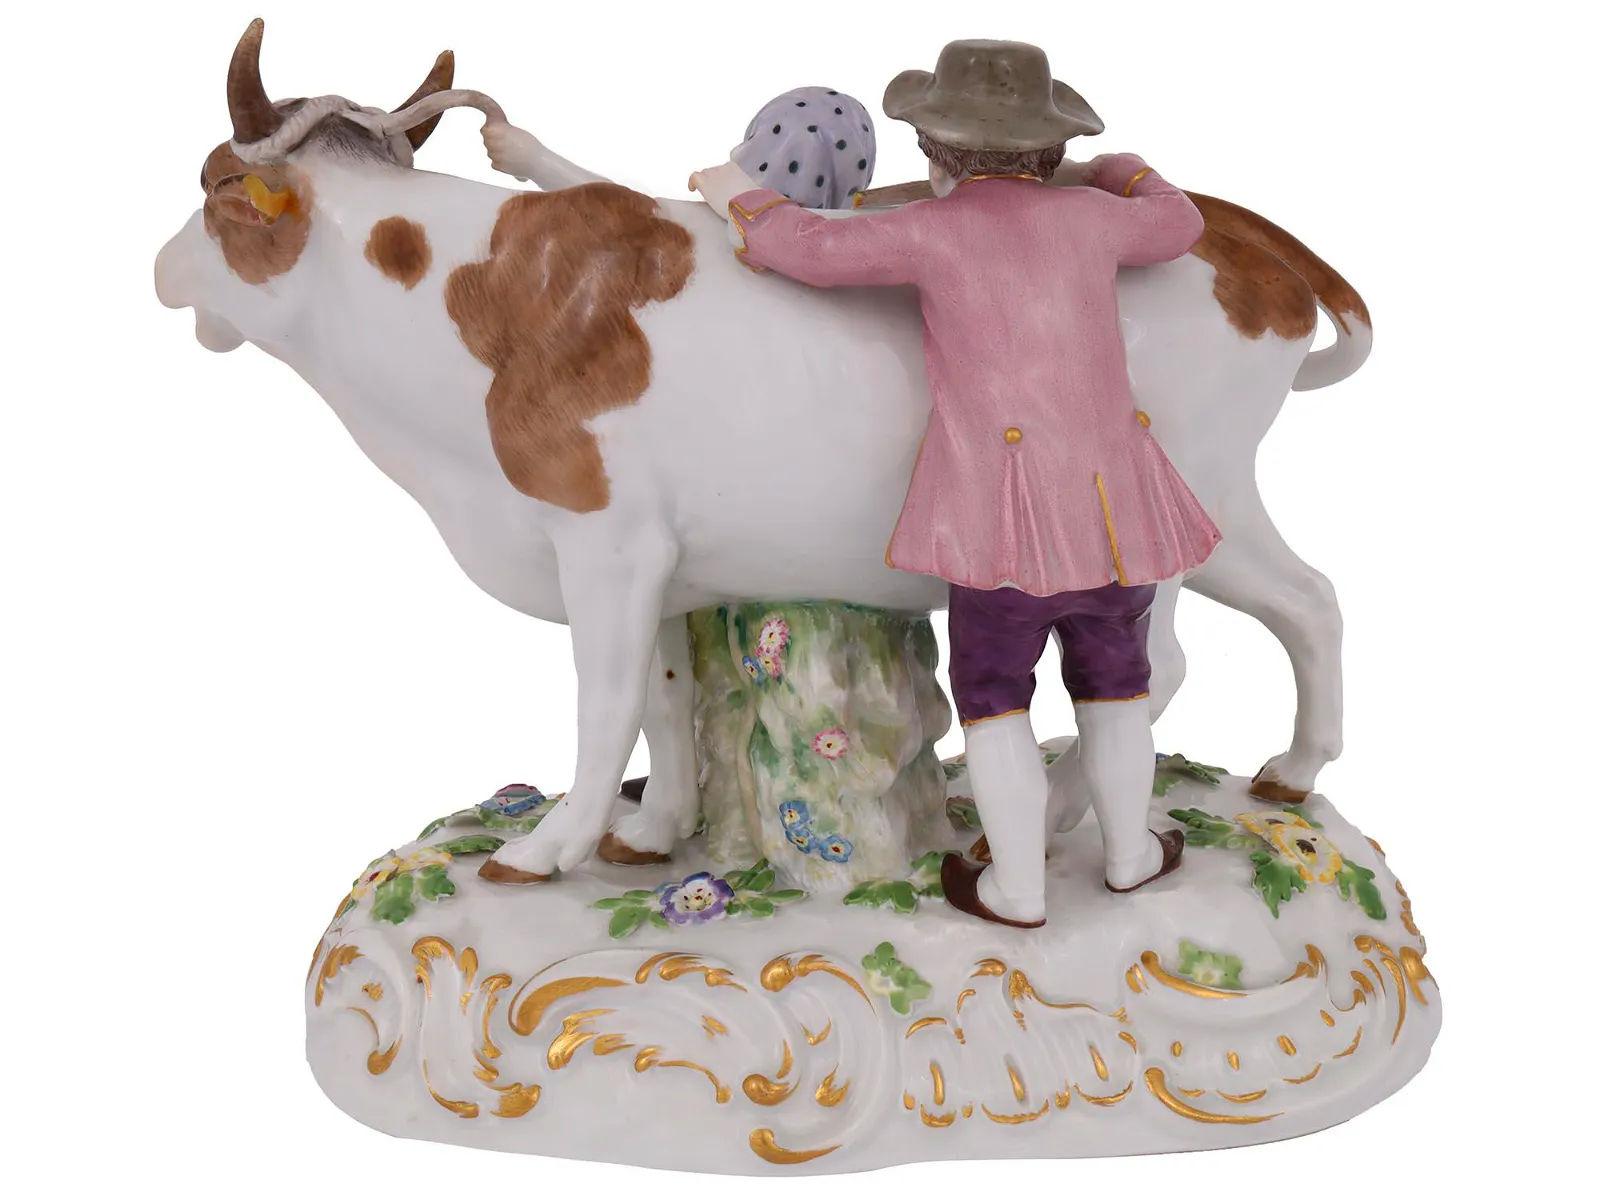 Rococo Revival Meissen Porcelain Figurine of Bull with Boy and Girl For Sale